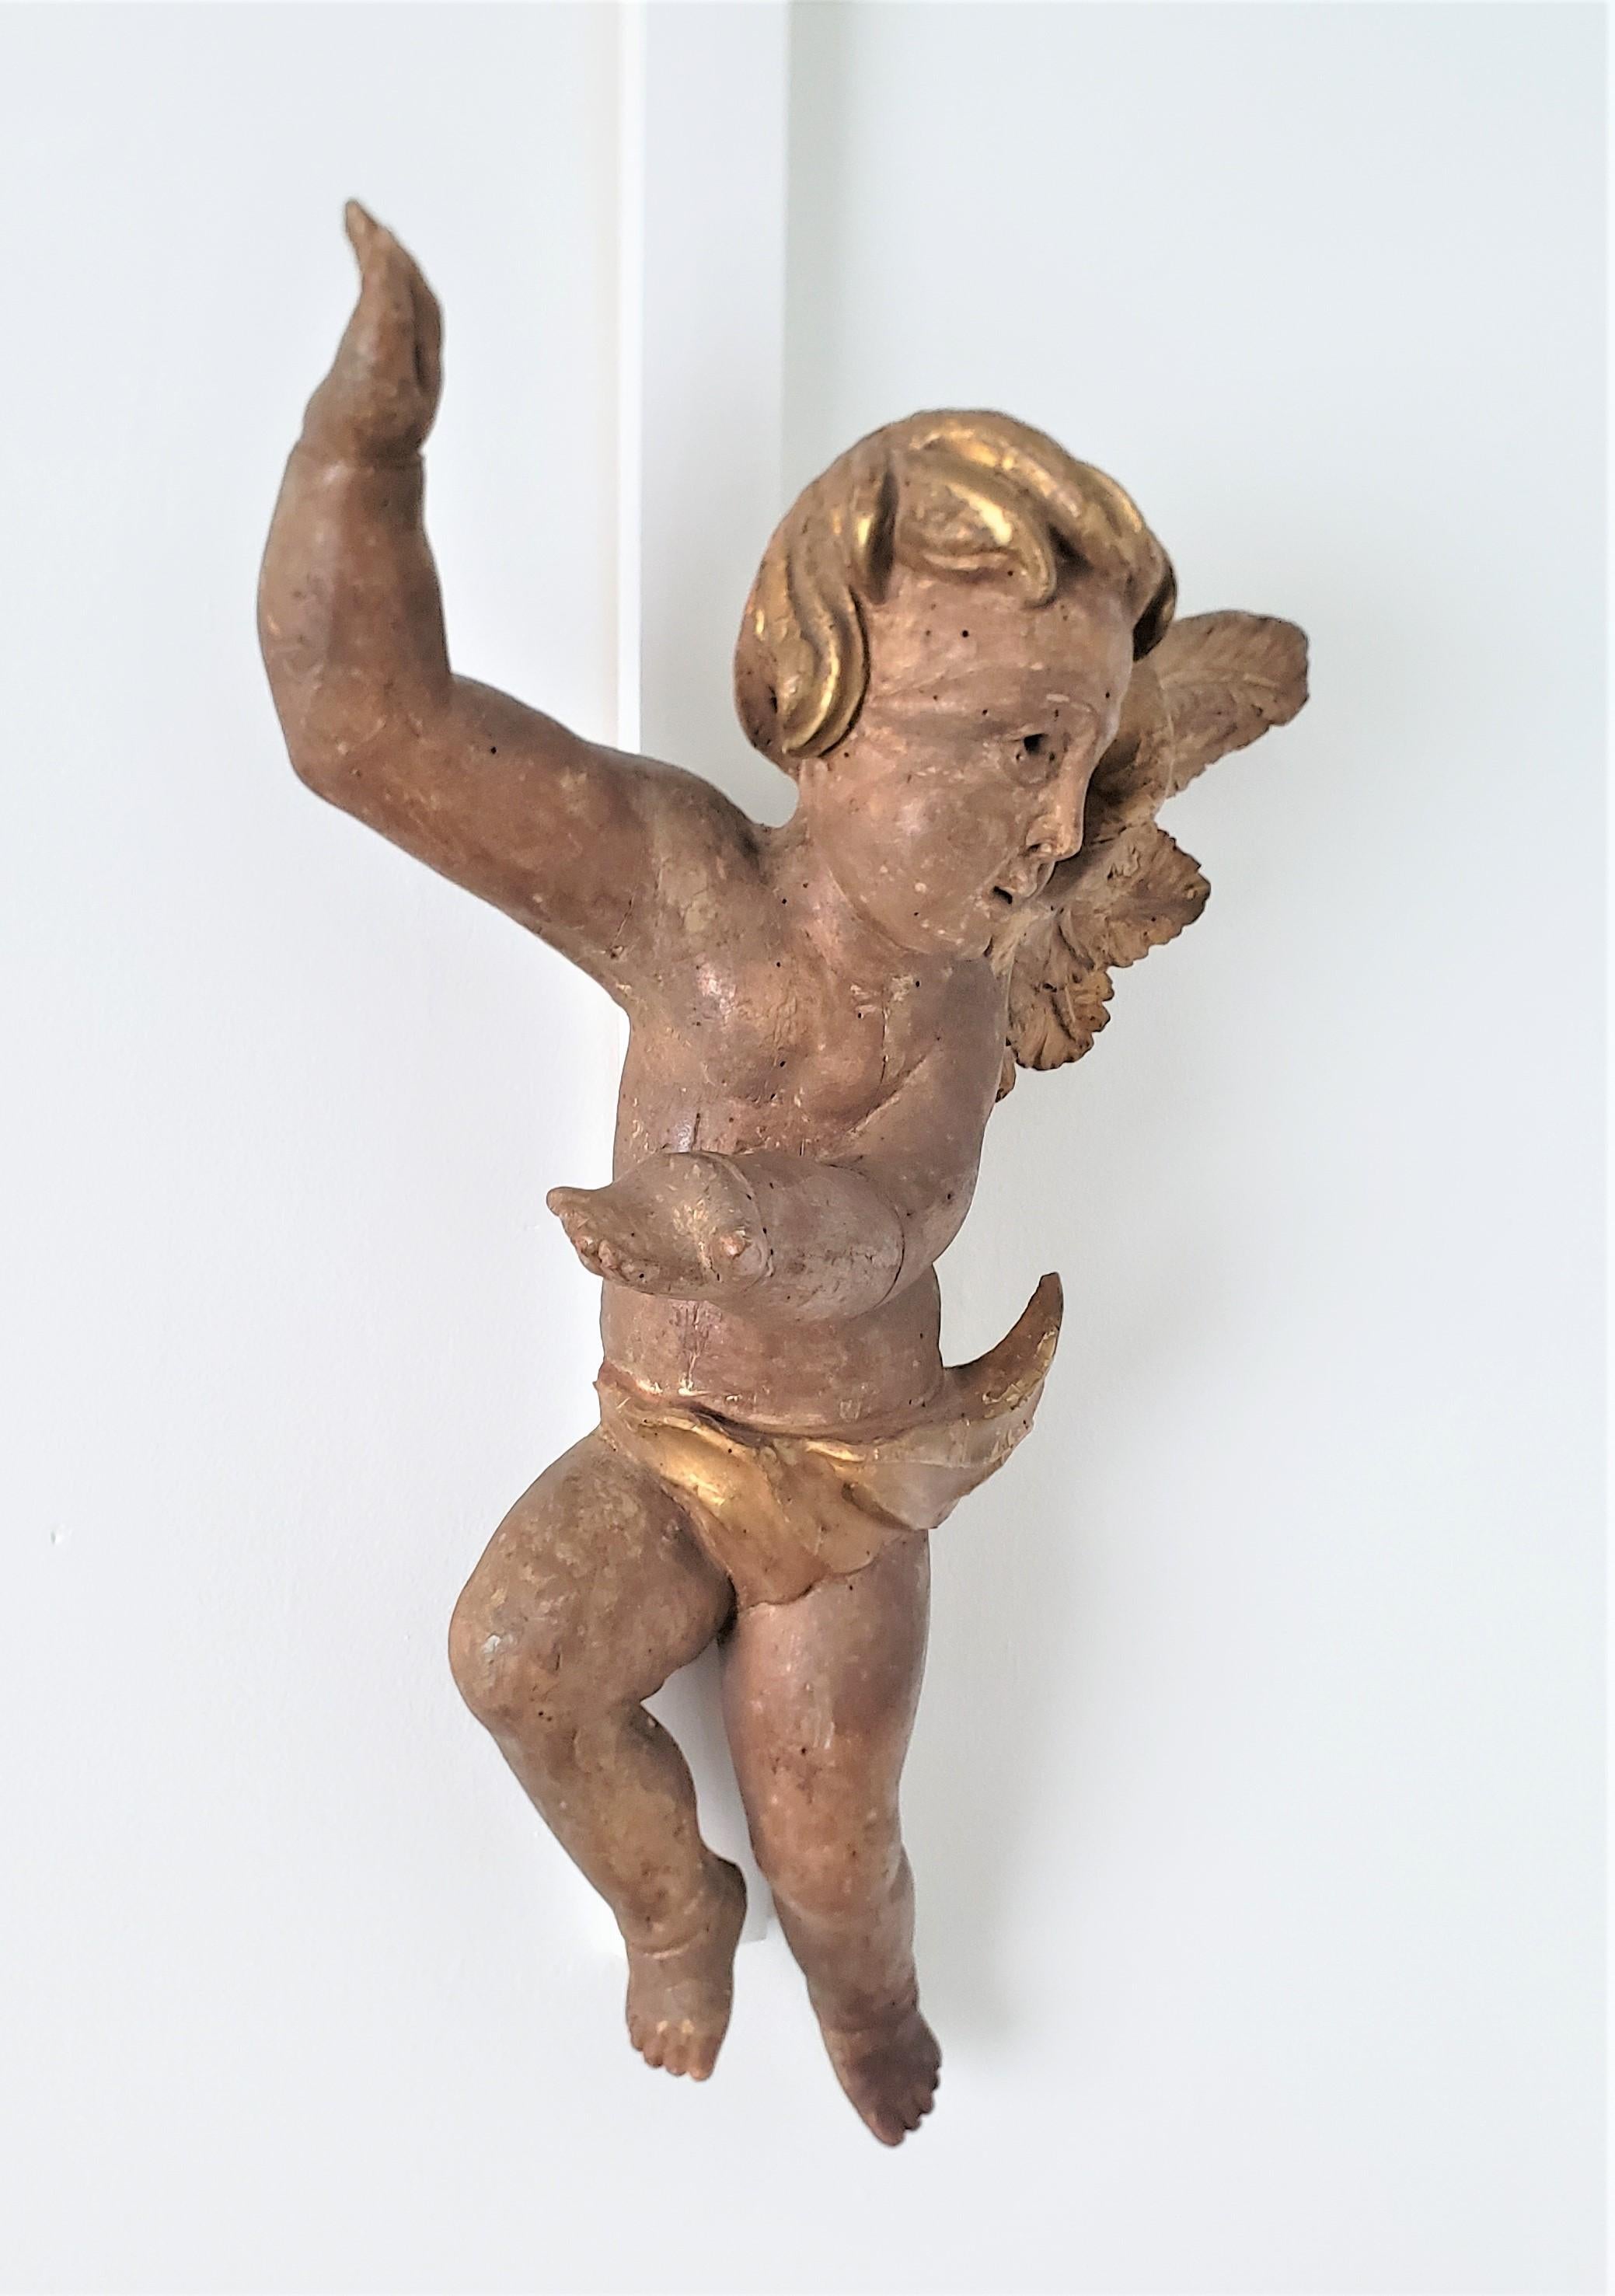 Large Antique Hand-Carved Wooden Cherub Architectural Element or Wall Sculpture In Good Condition For Sale In Hamilton, Ontario